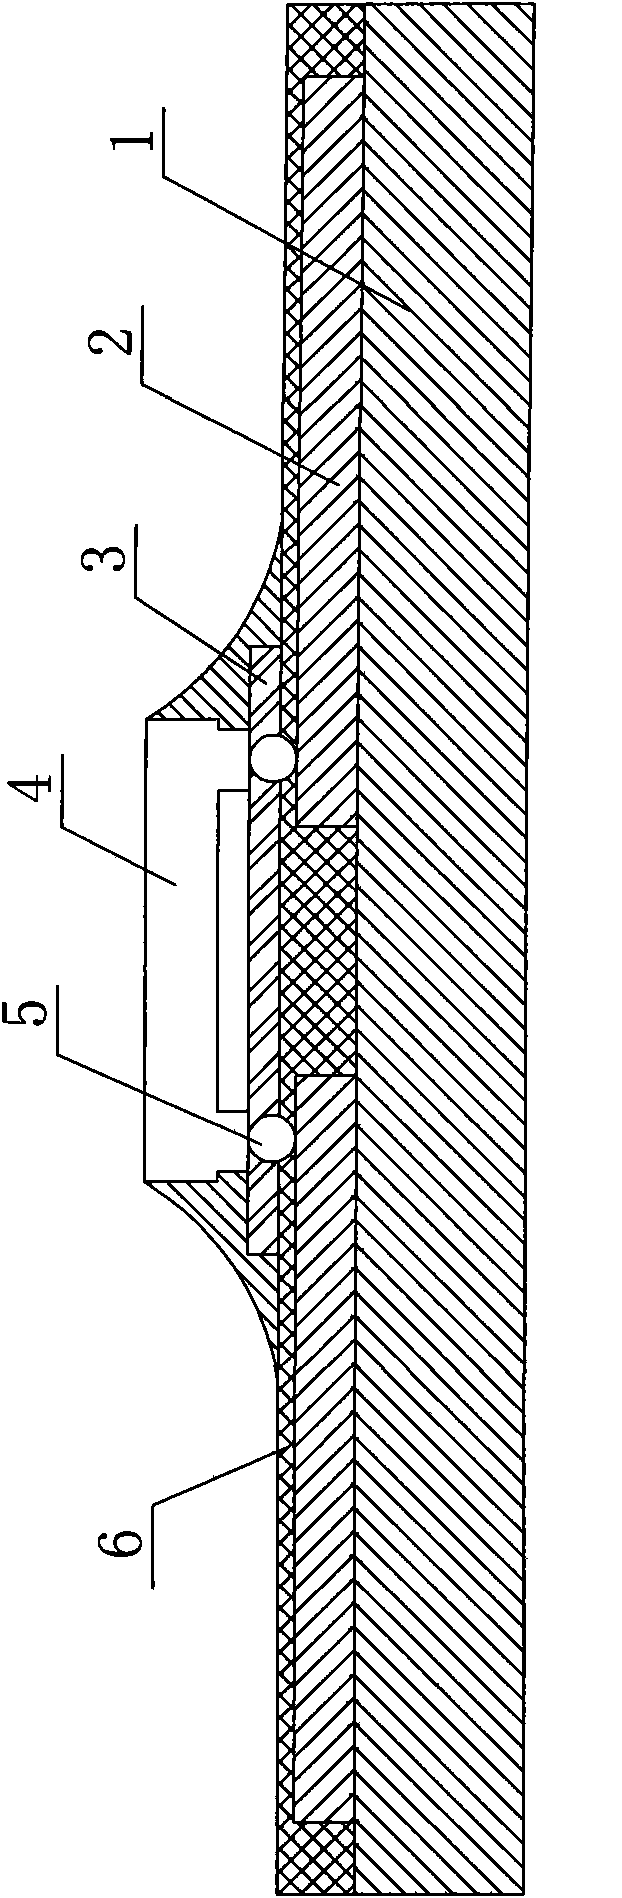 Binding manufacture technology for electrical element of flat-panel display